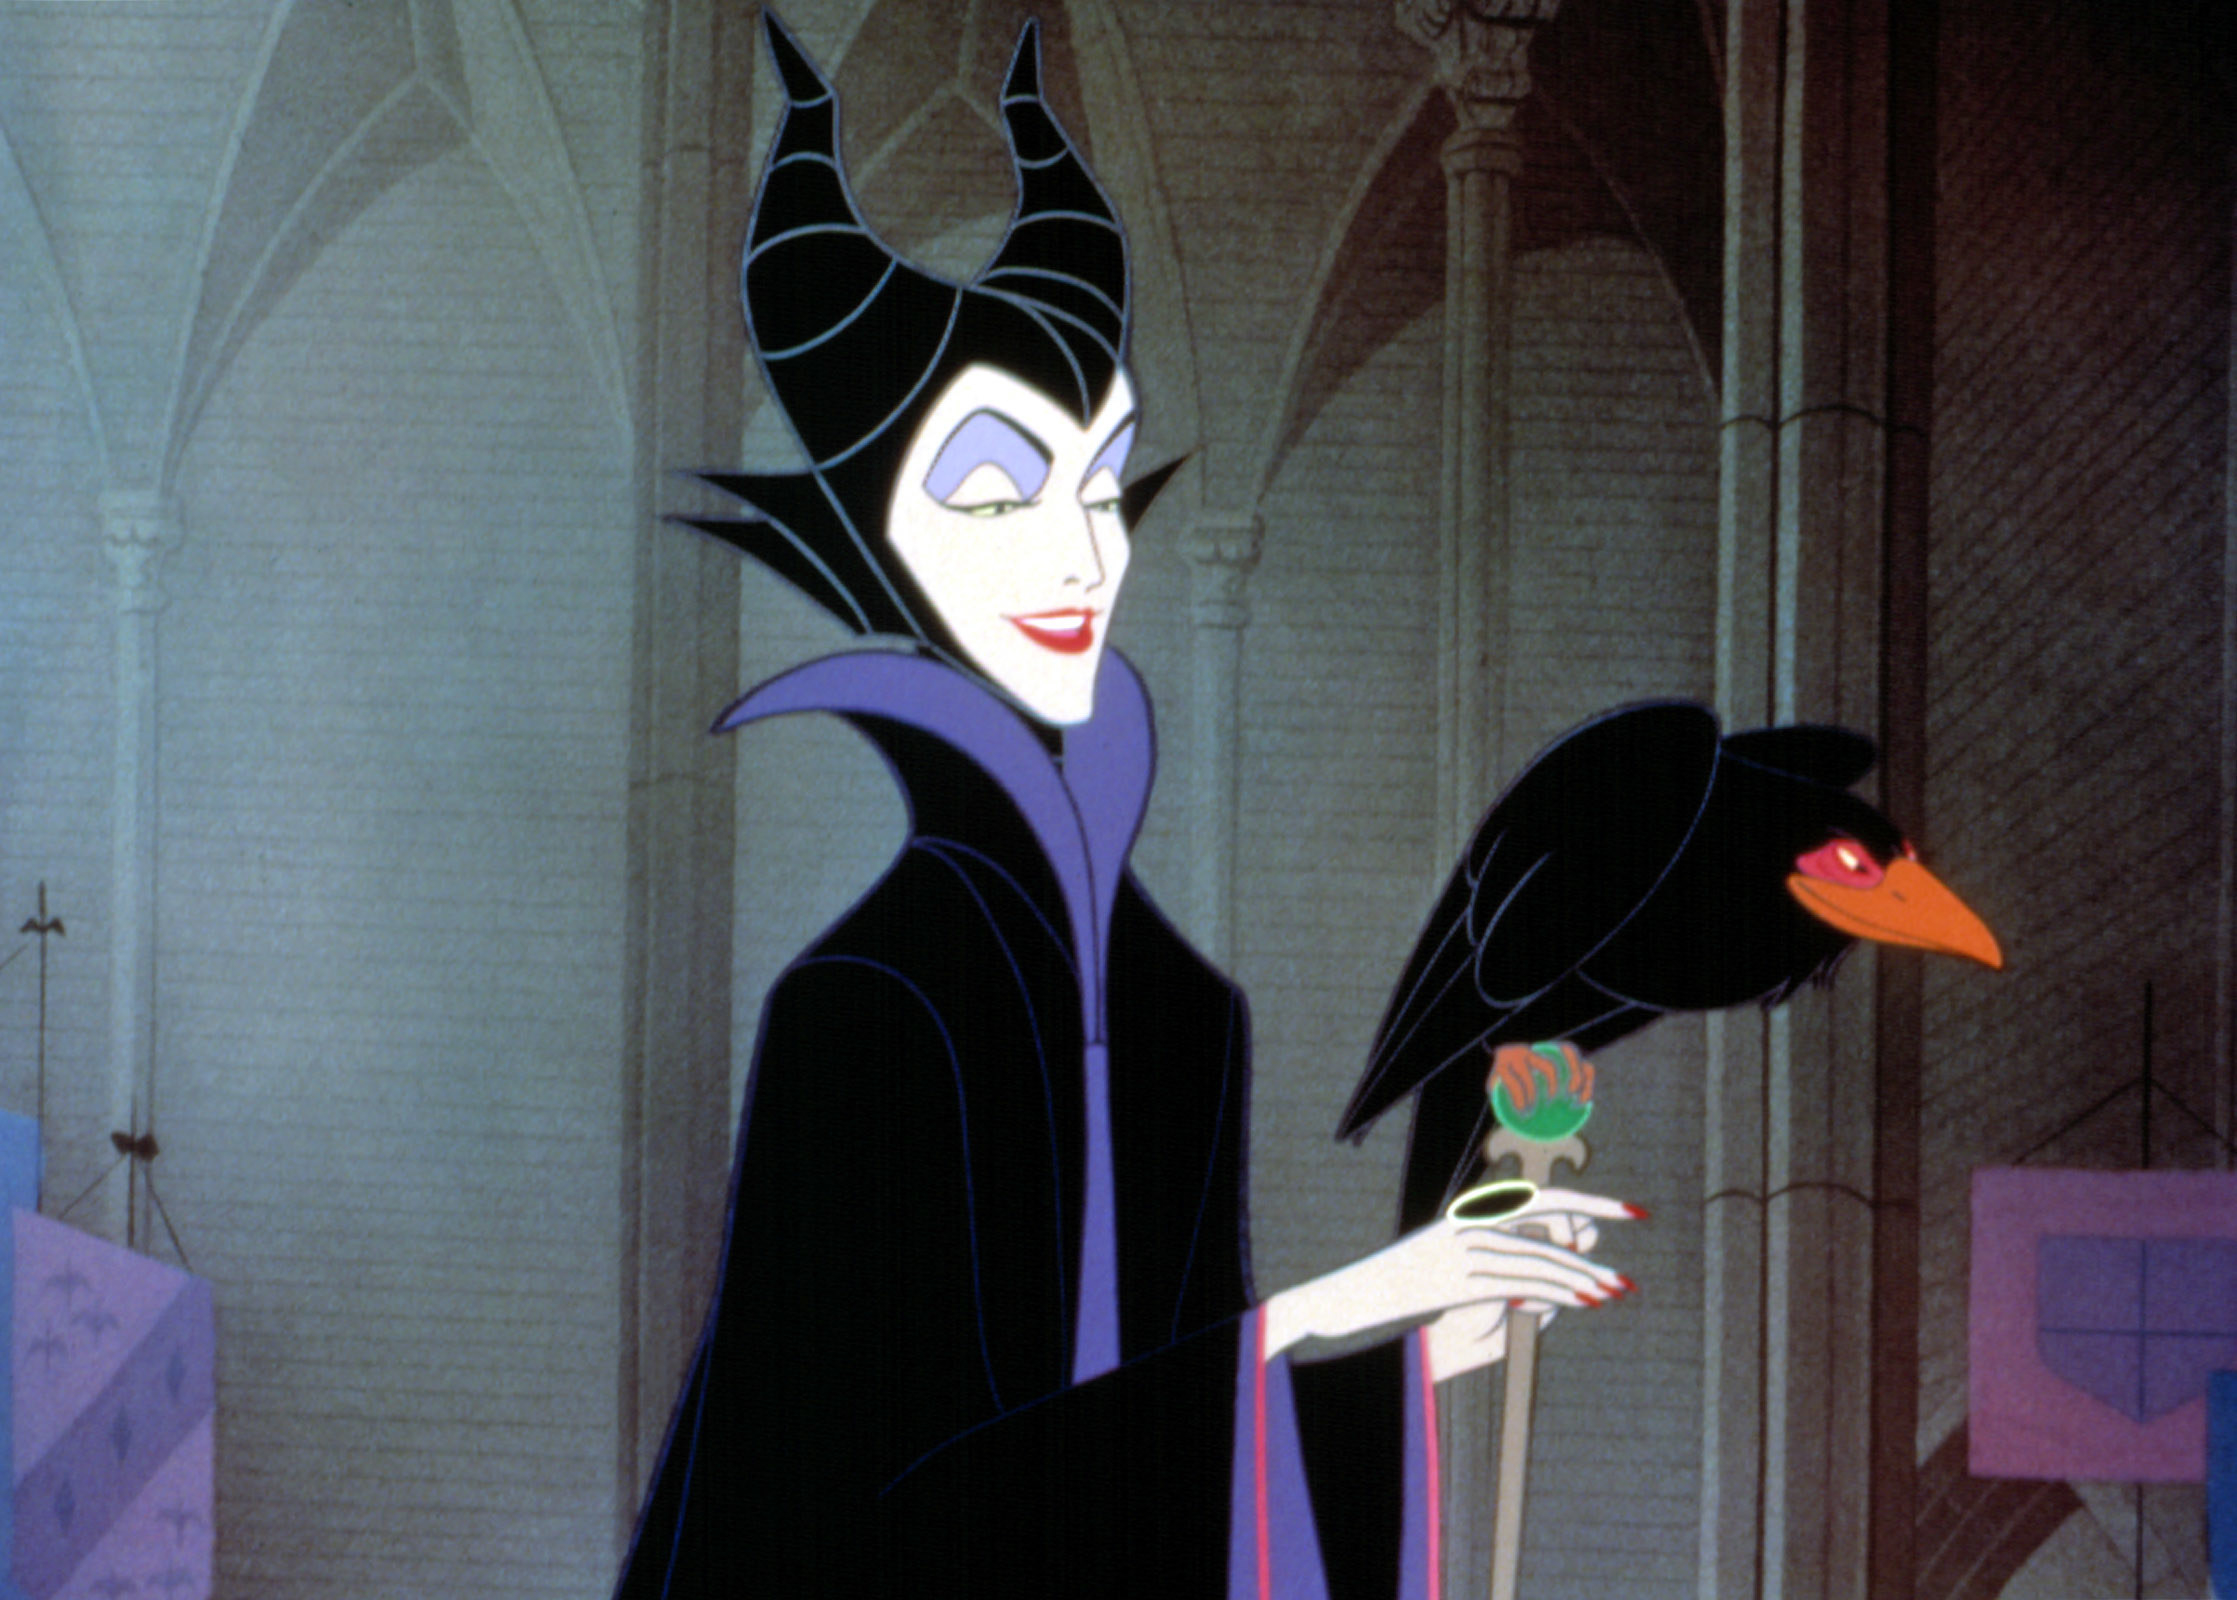 maleficent and her crow